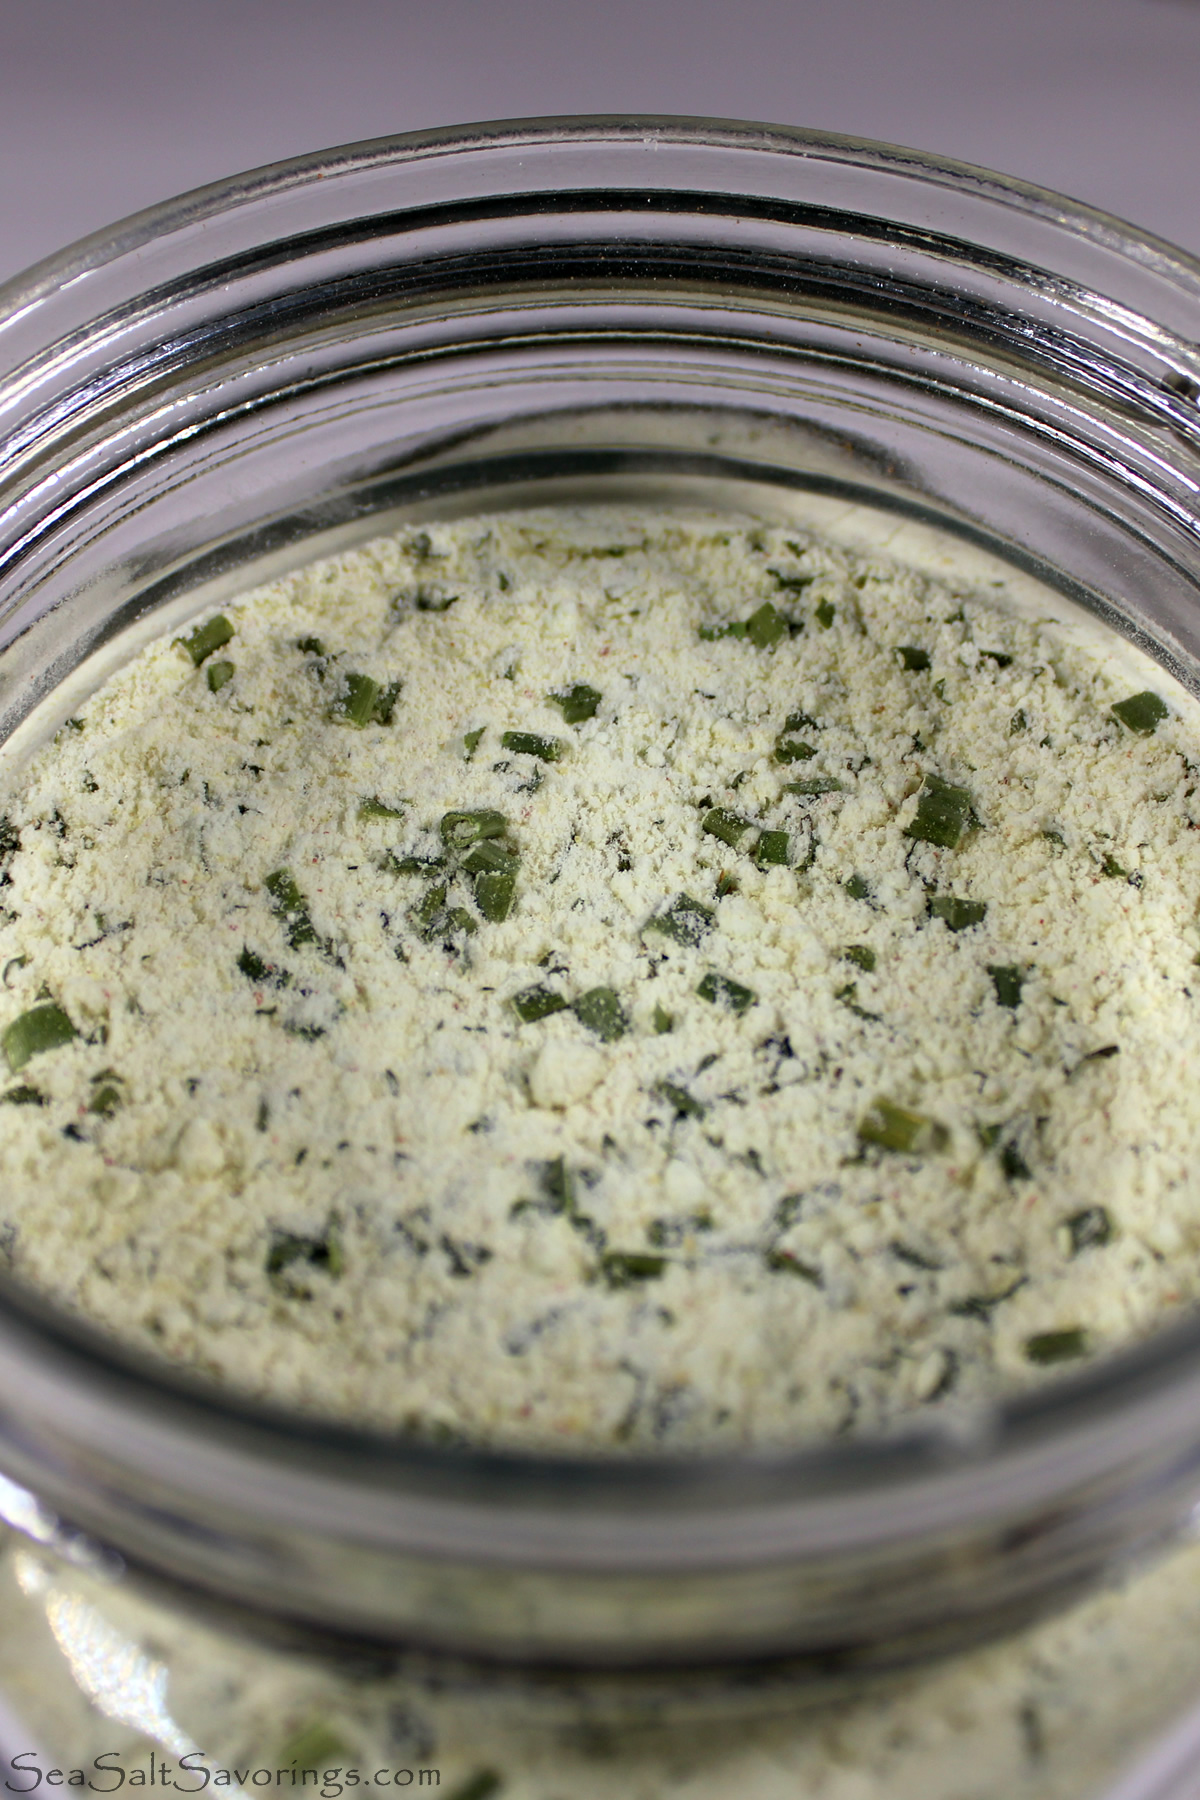 ranch seasoning close up view in a glass jar